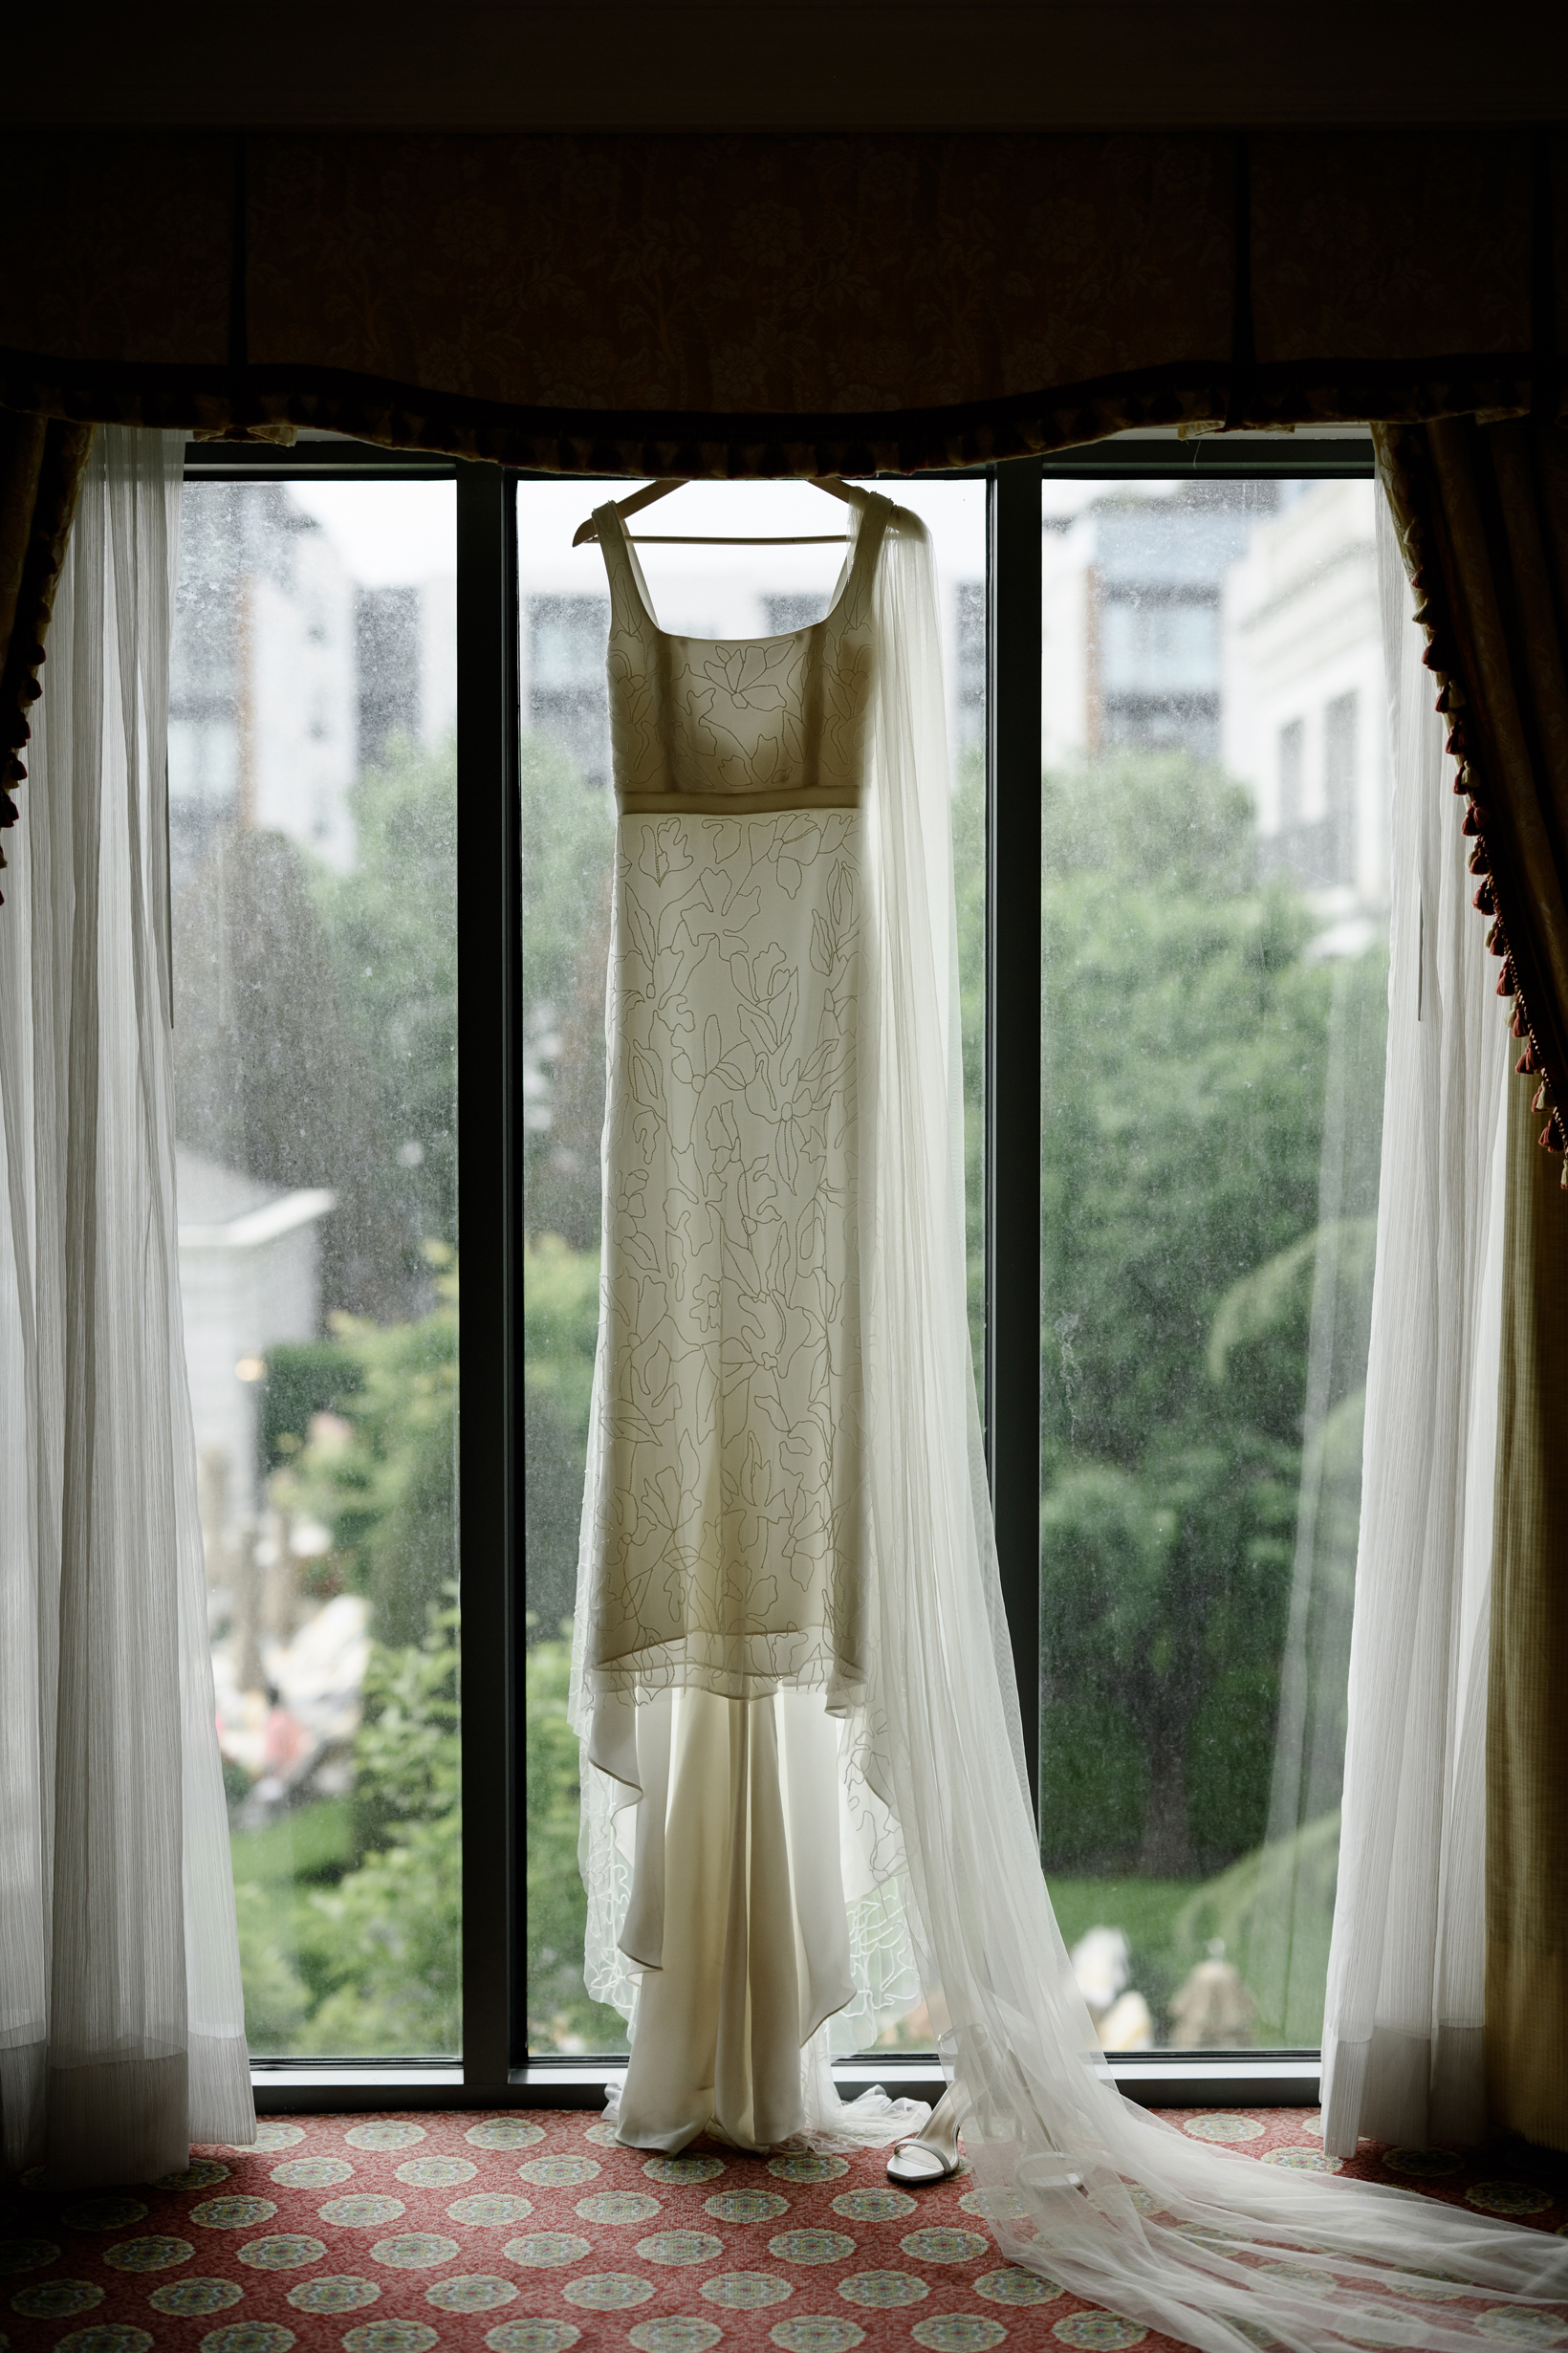 A sheer dress hanging in a window at the grand america hotel